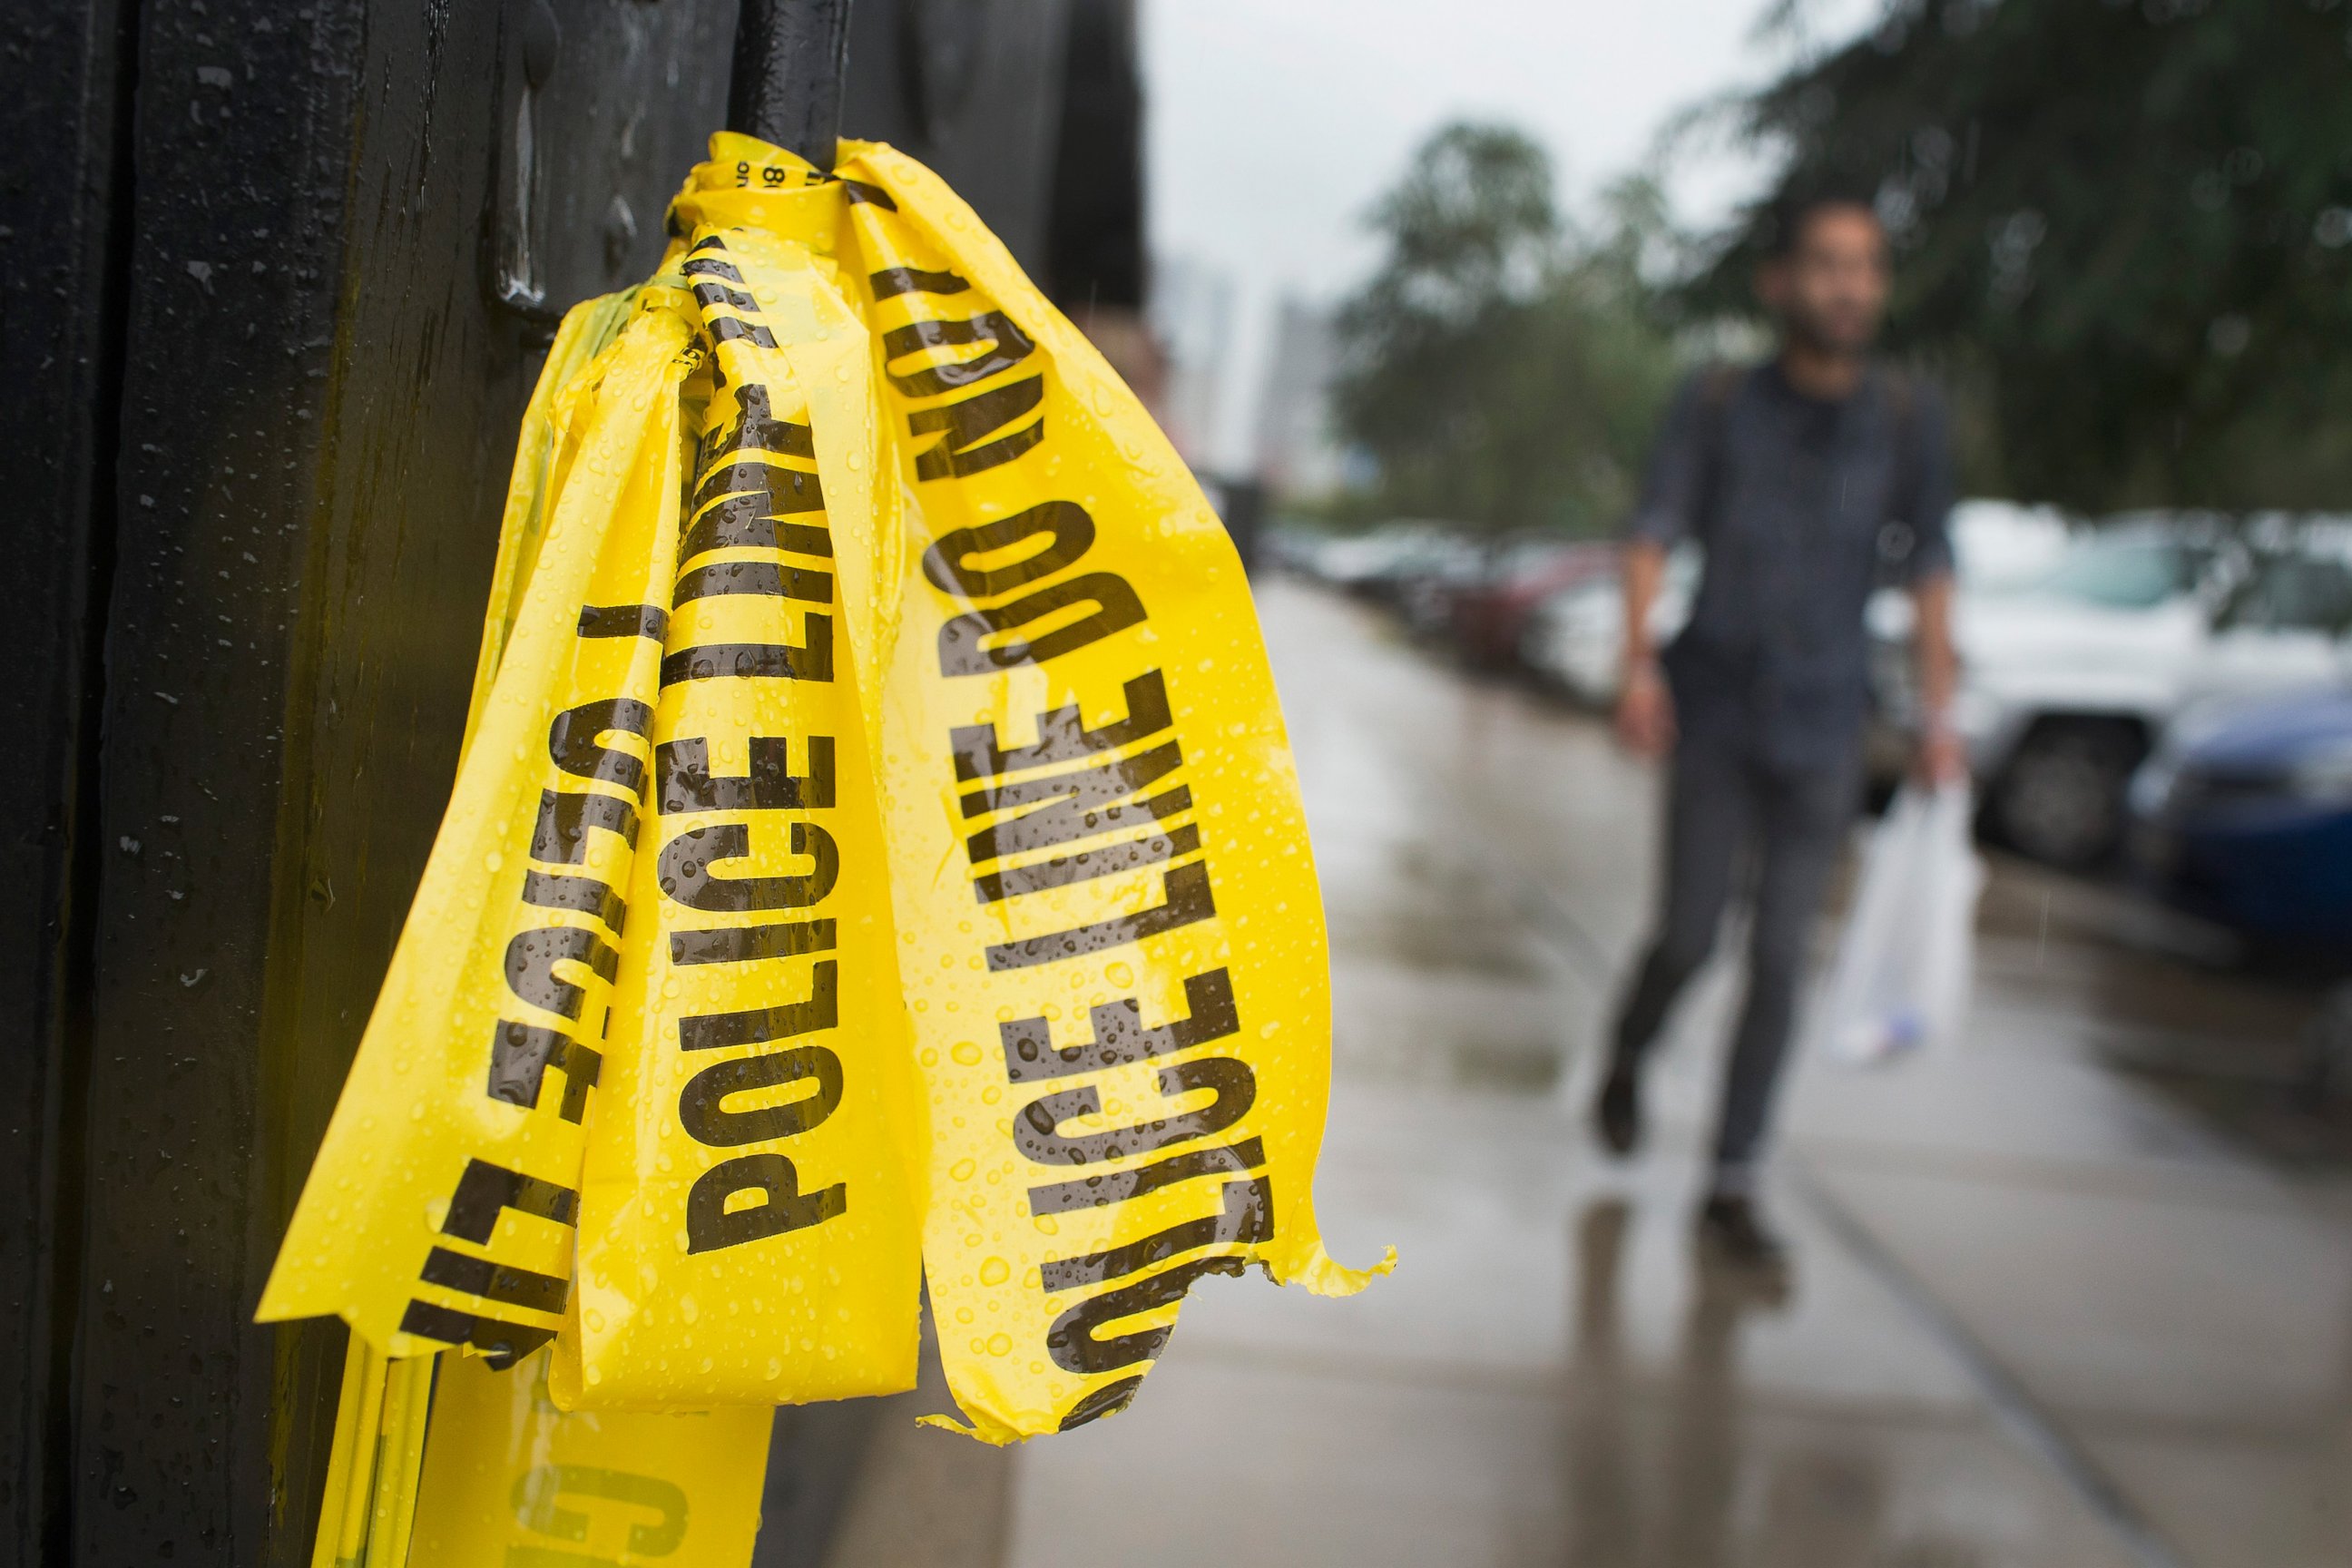 PHOTO: Crime scene tape hangs in the West Loop restaurant district where a 23-year-old man was shot and killed over the Labor Day weekend on Sept. 8, 2015 in Chicago.